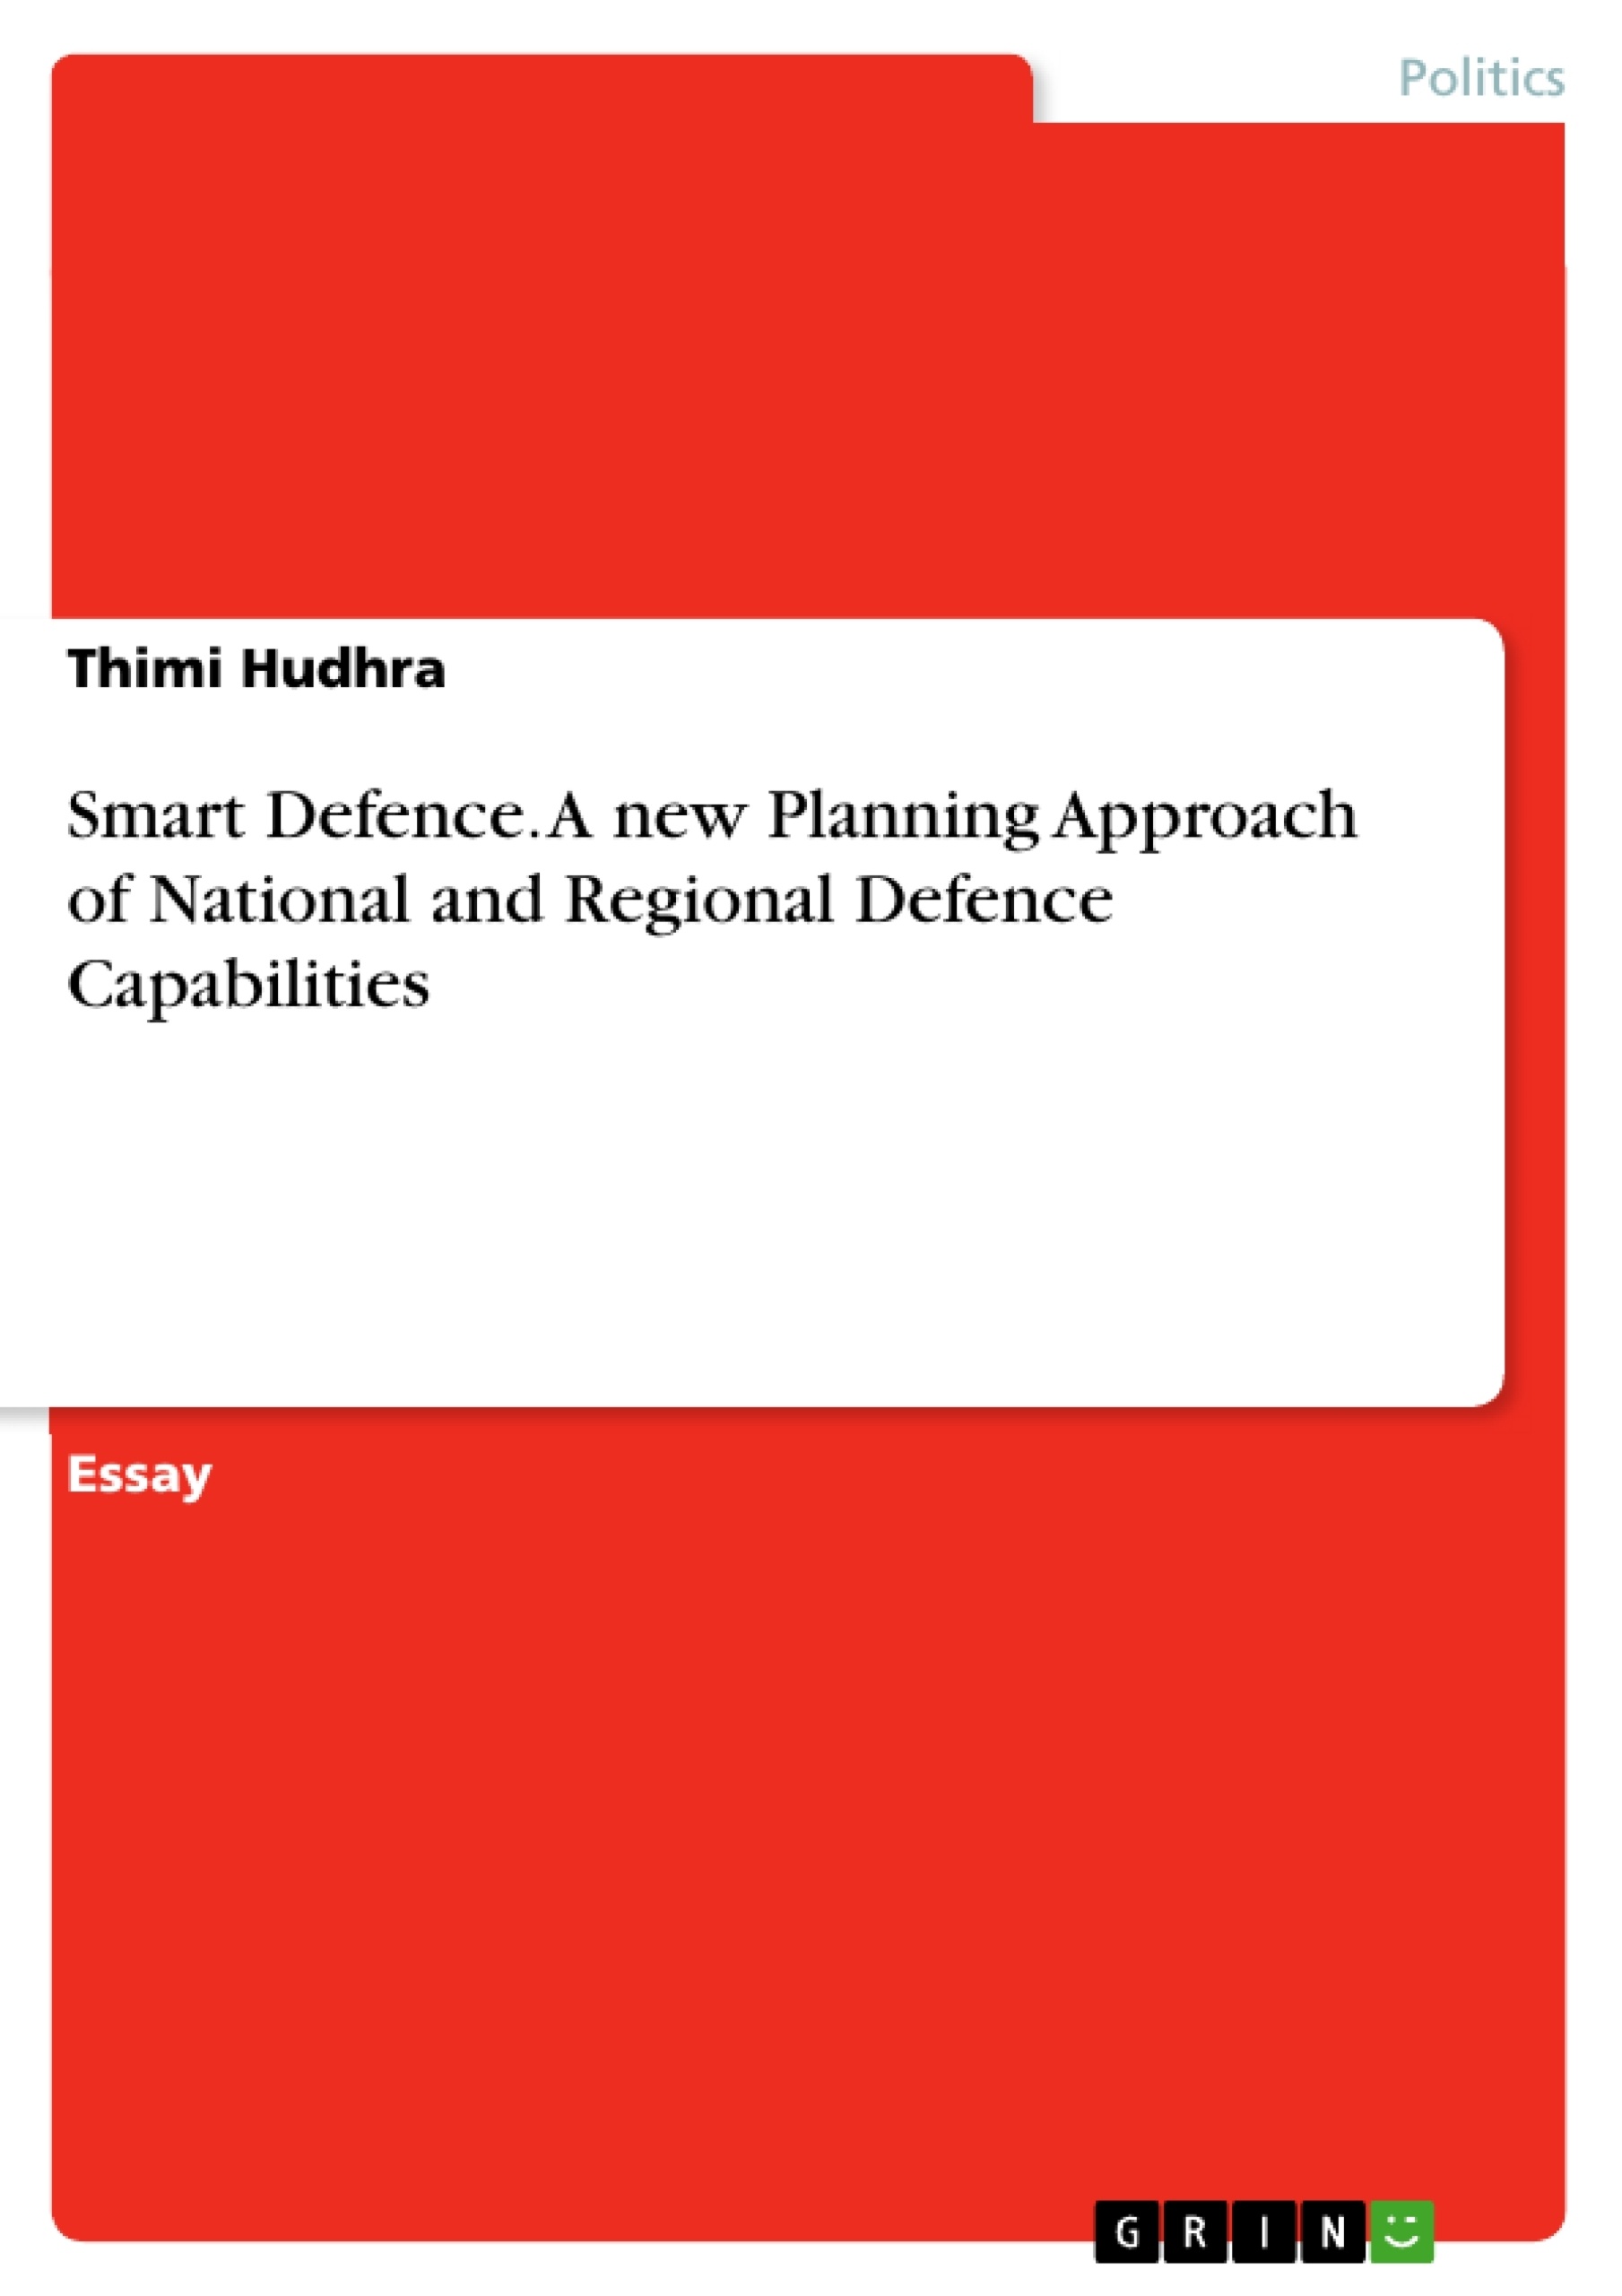 Title: Smart Defence. A new Planning Approach of National and Regional Defence Capabilities